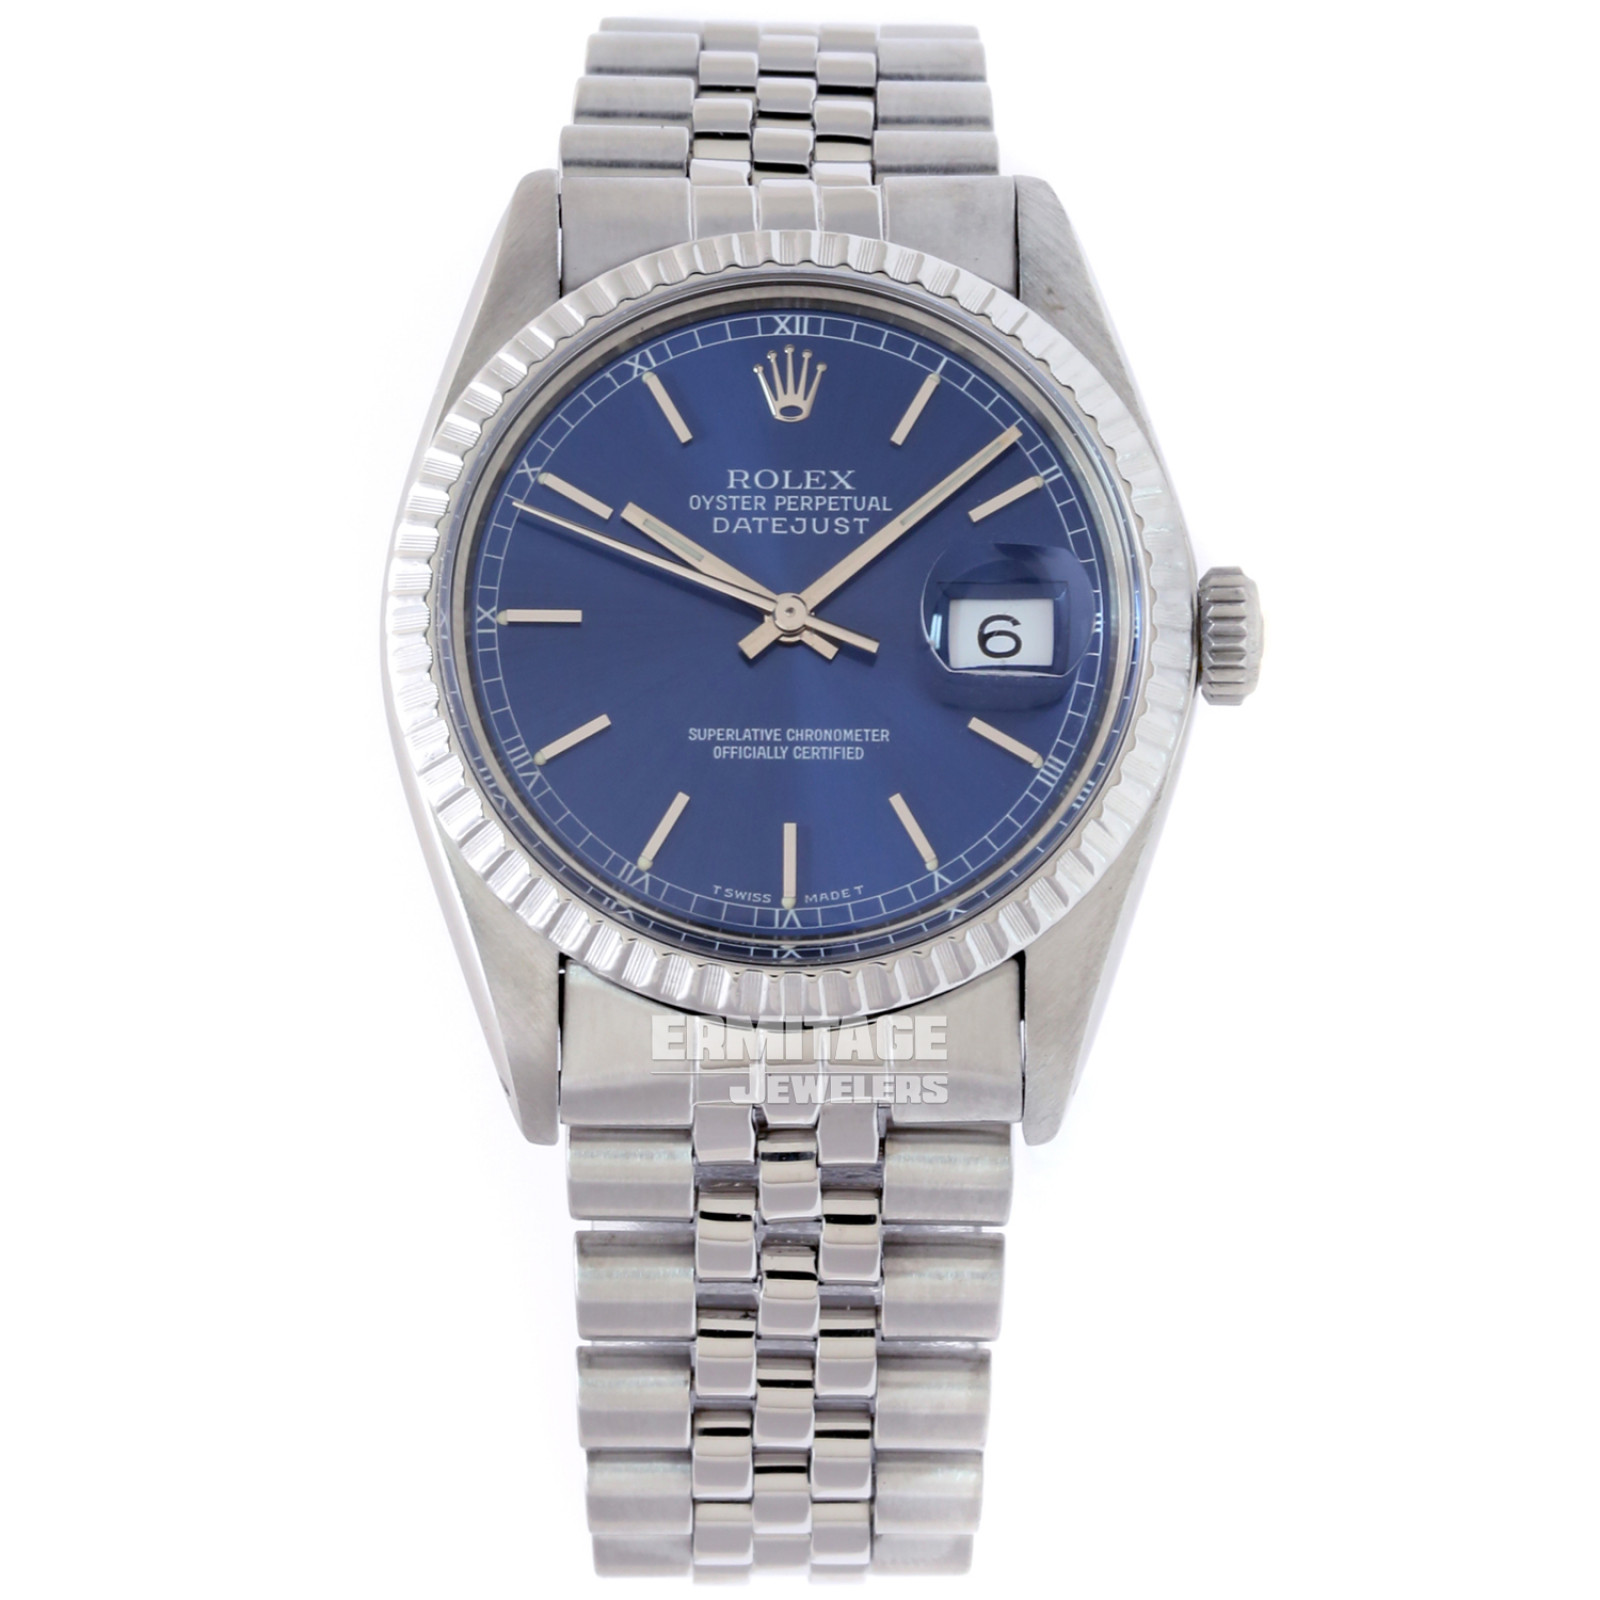 Rolex Datejust 16030 with Blue Dial